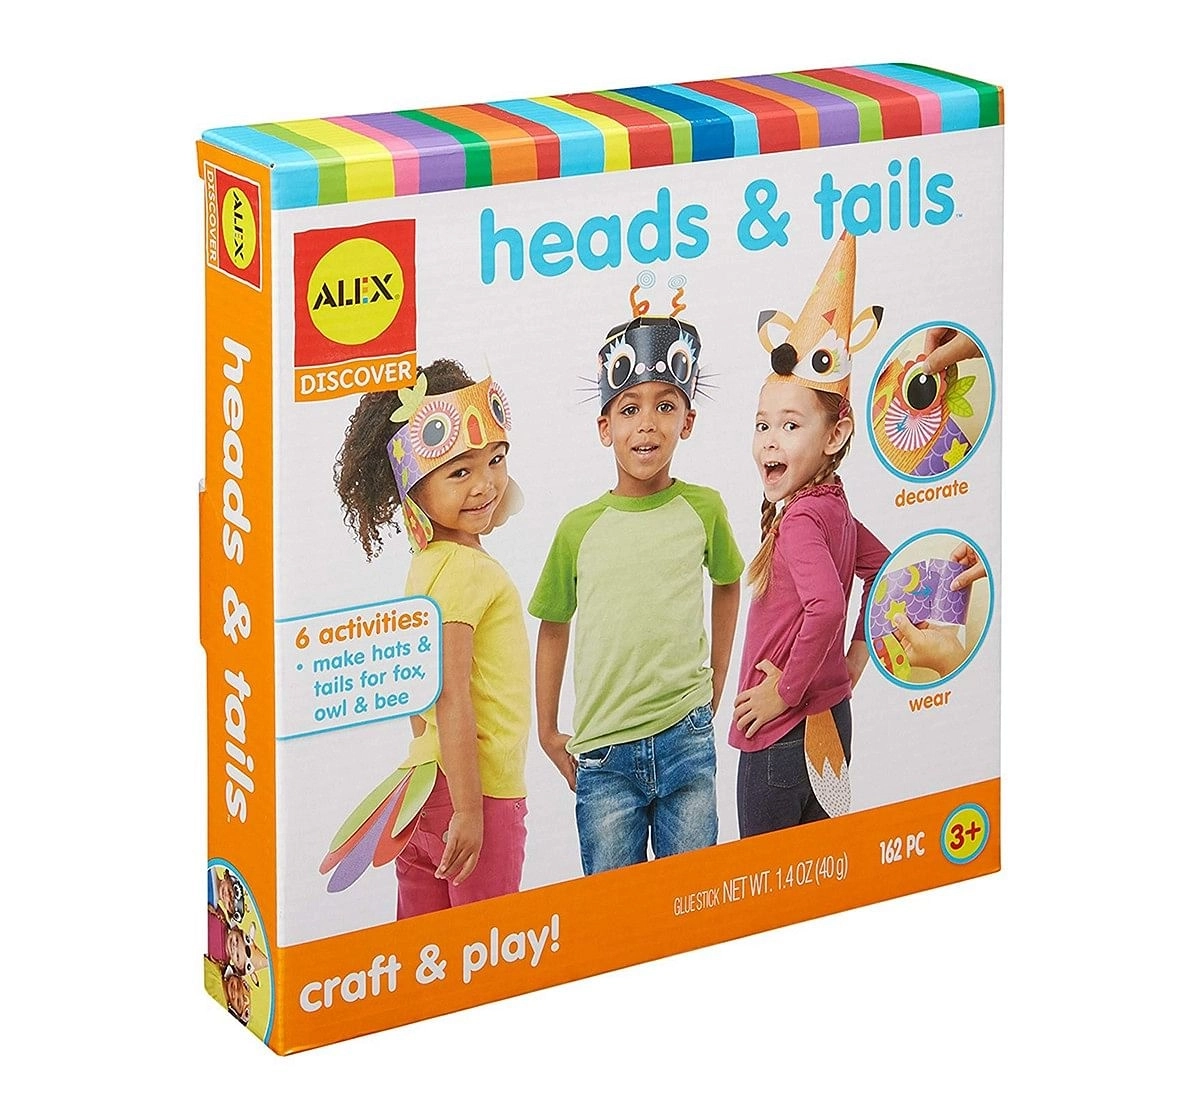 Alex Toys Heads & Tails Novelty DIY Art & Craft Kits for Kids age 3Y+ 